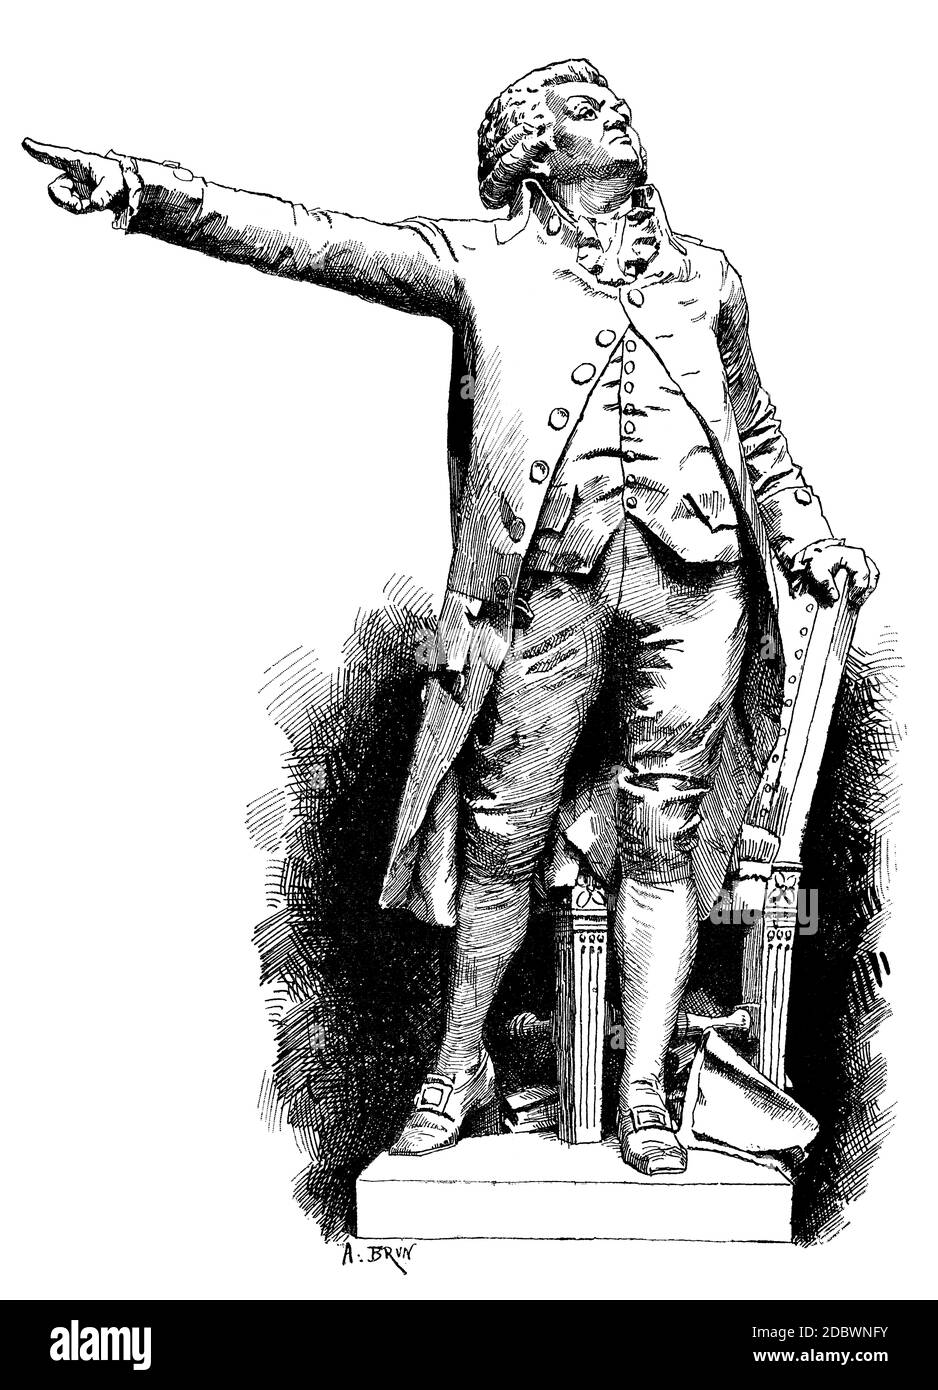 Statue of Mirabeau (French revolutionary) by Cailllé (engraving) Stock Photo